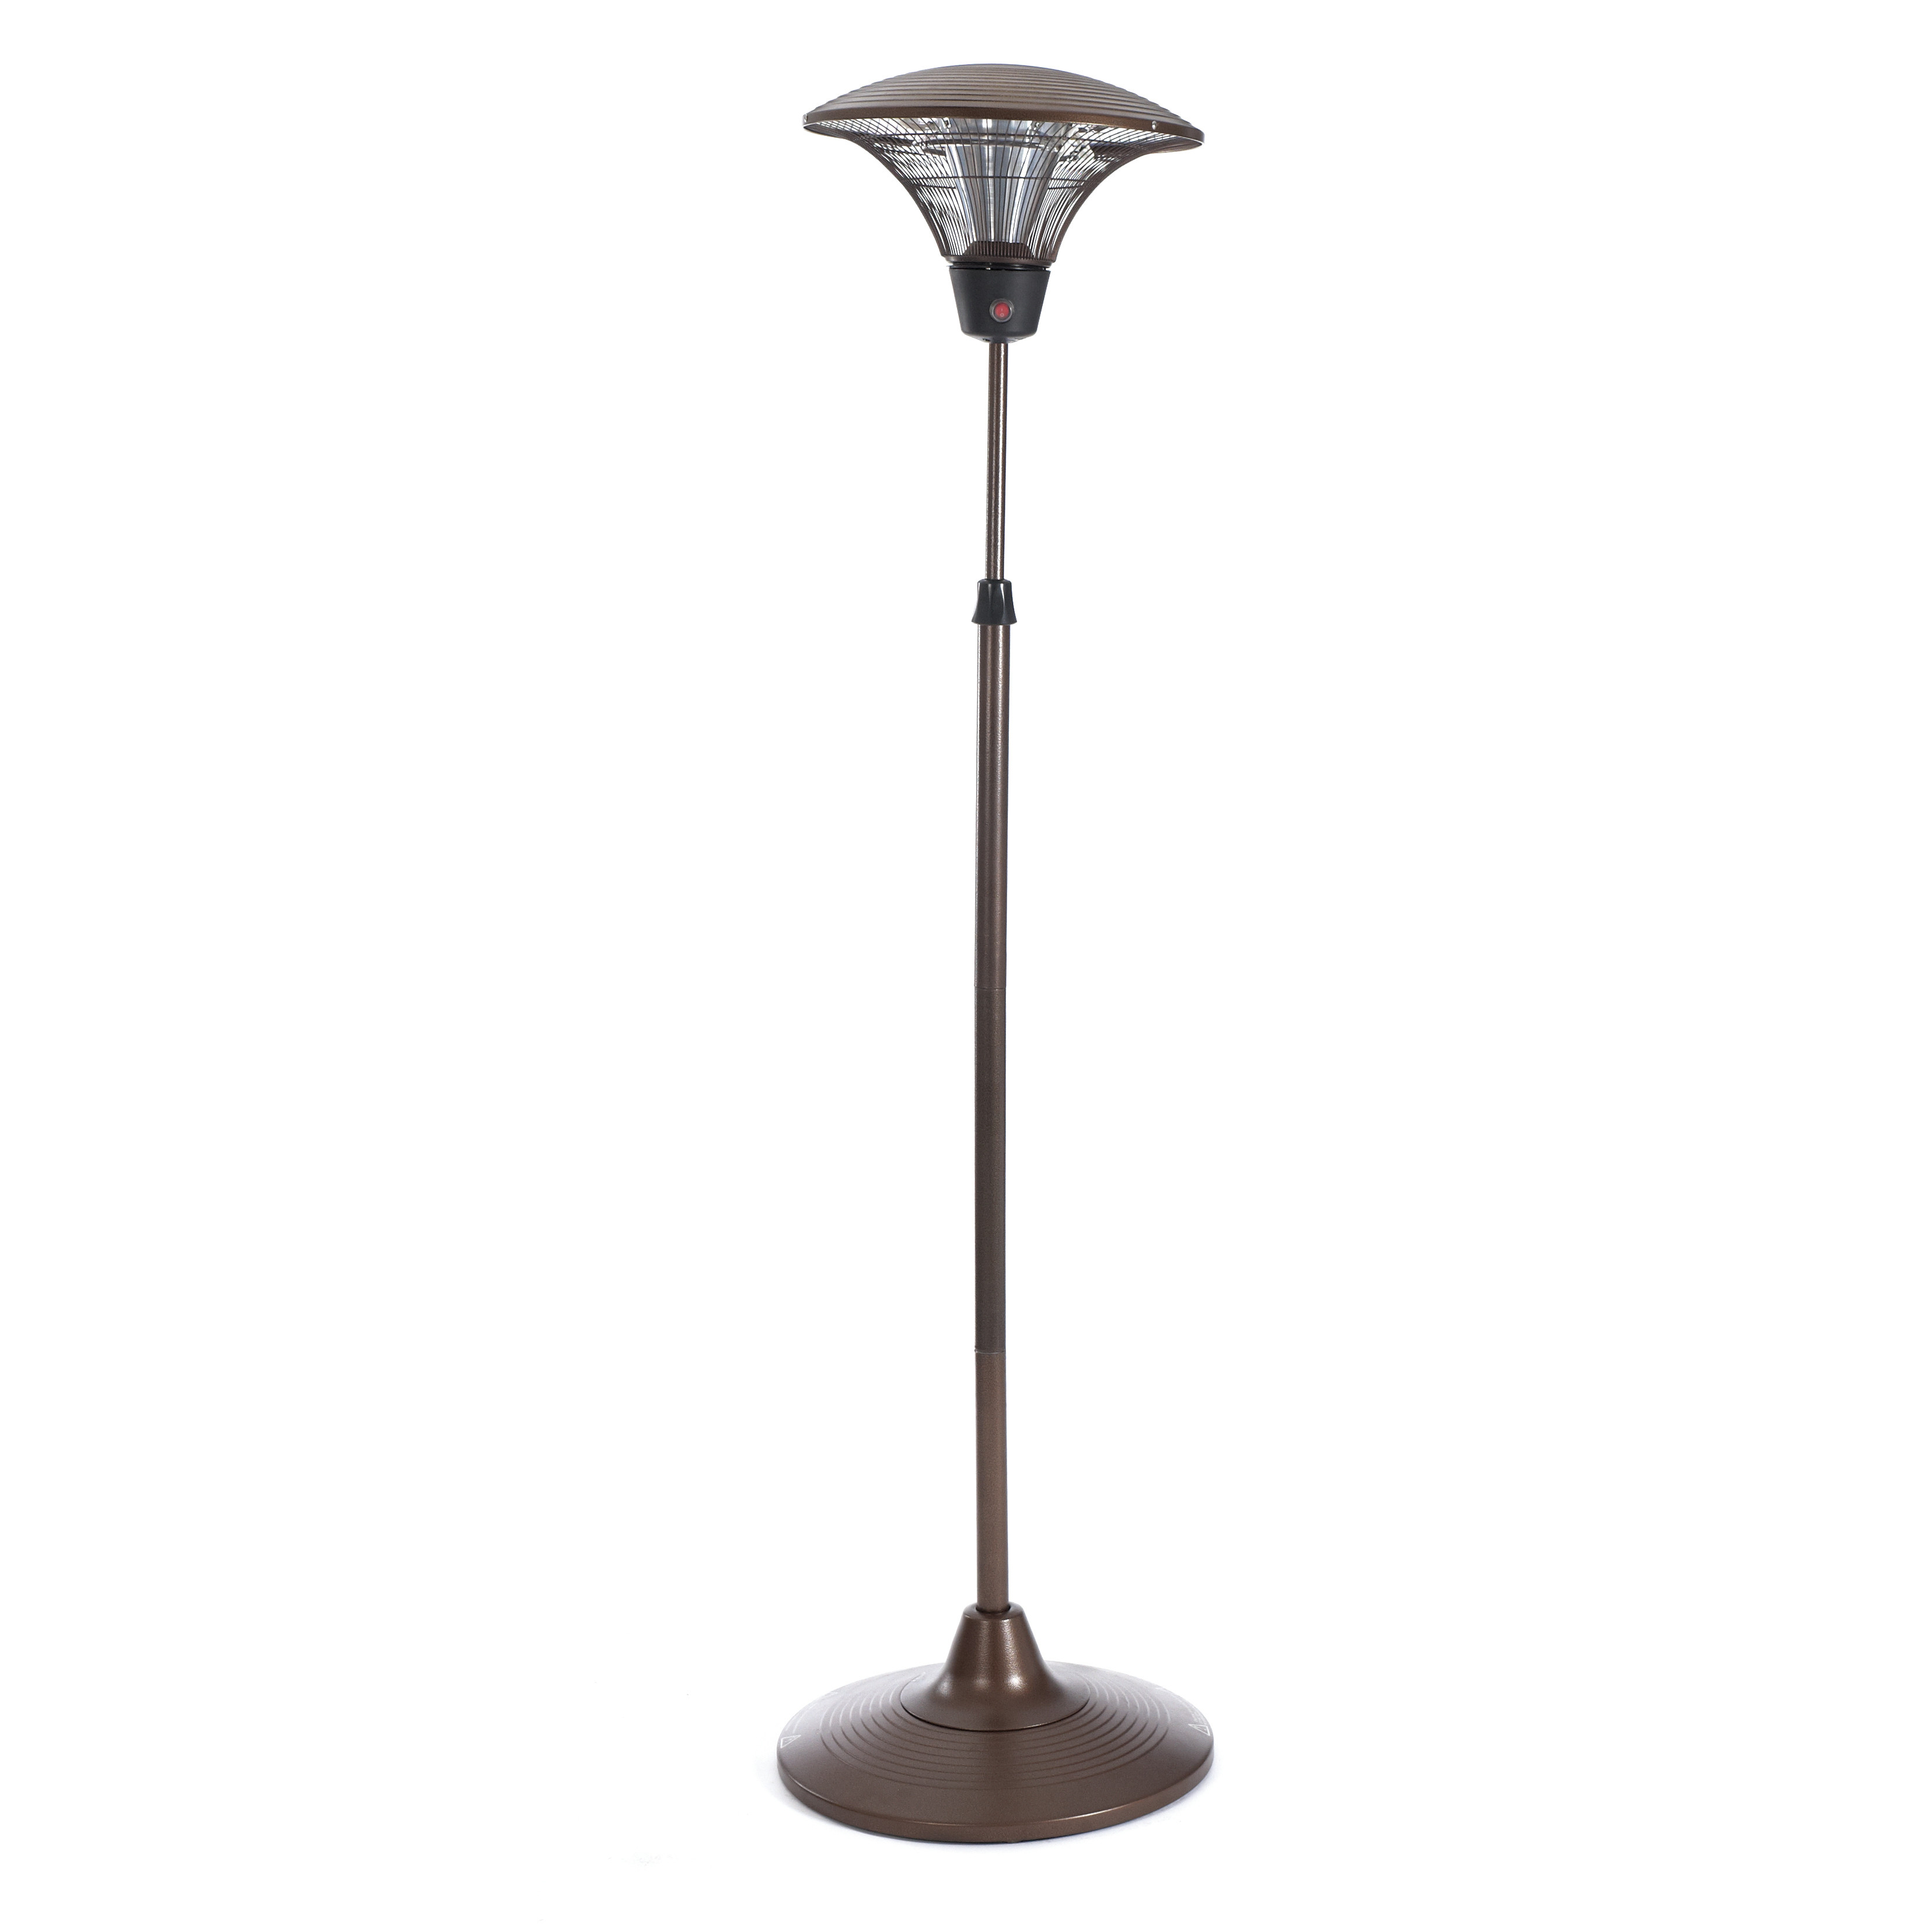 Gablemere Deluxe Patio Heater